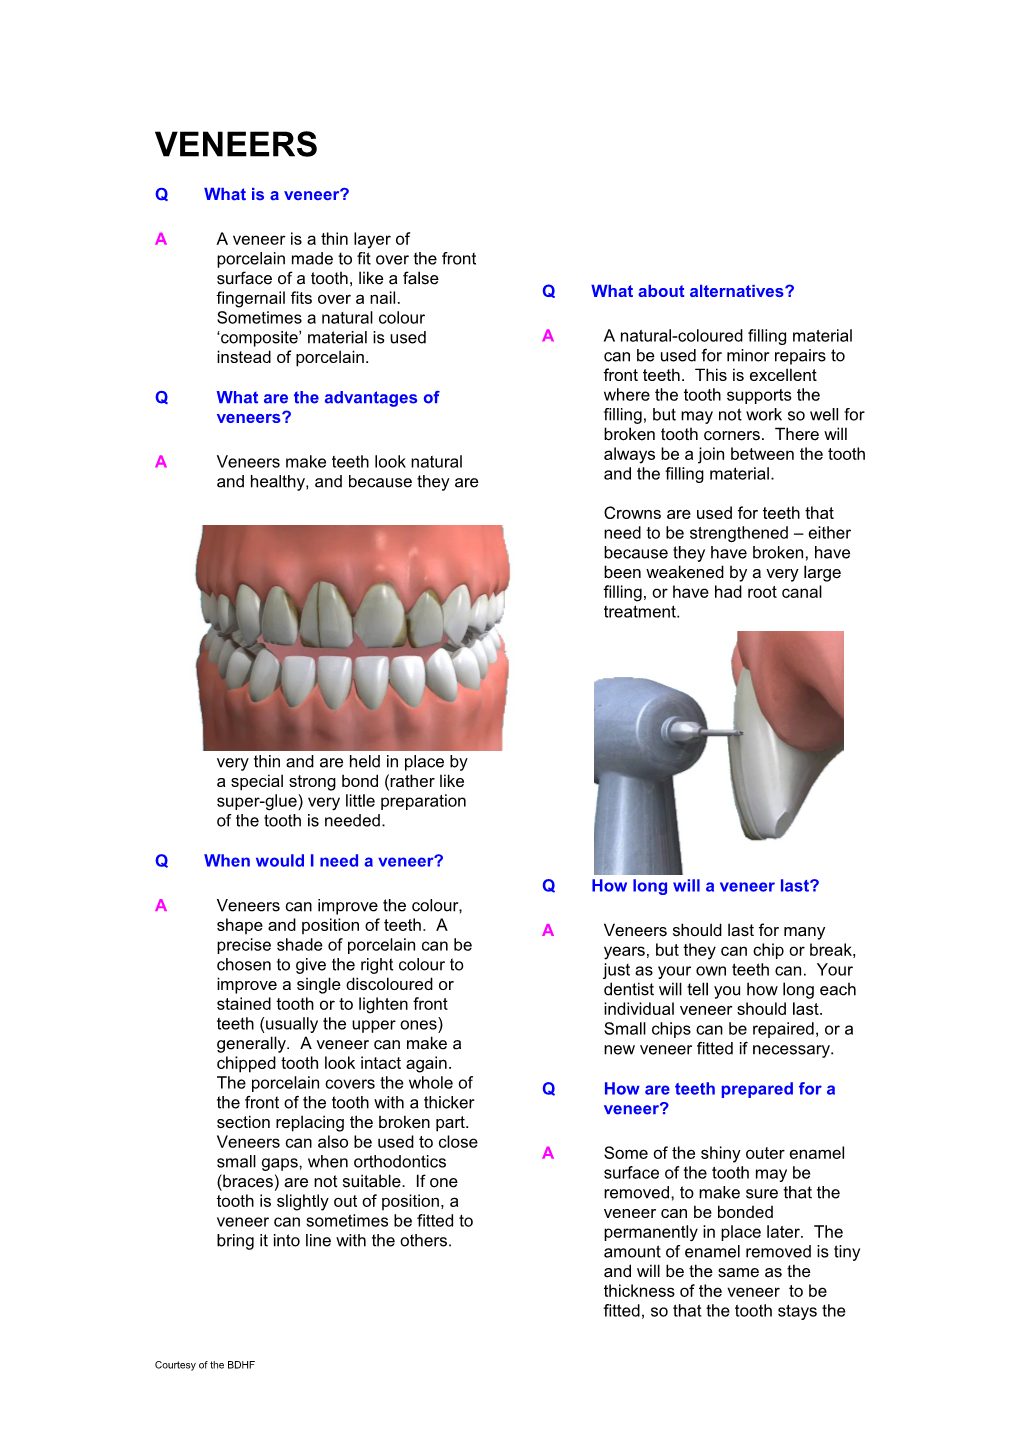 Qwhat Are the Advantages of Veneers?